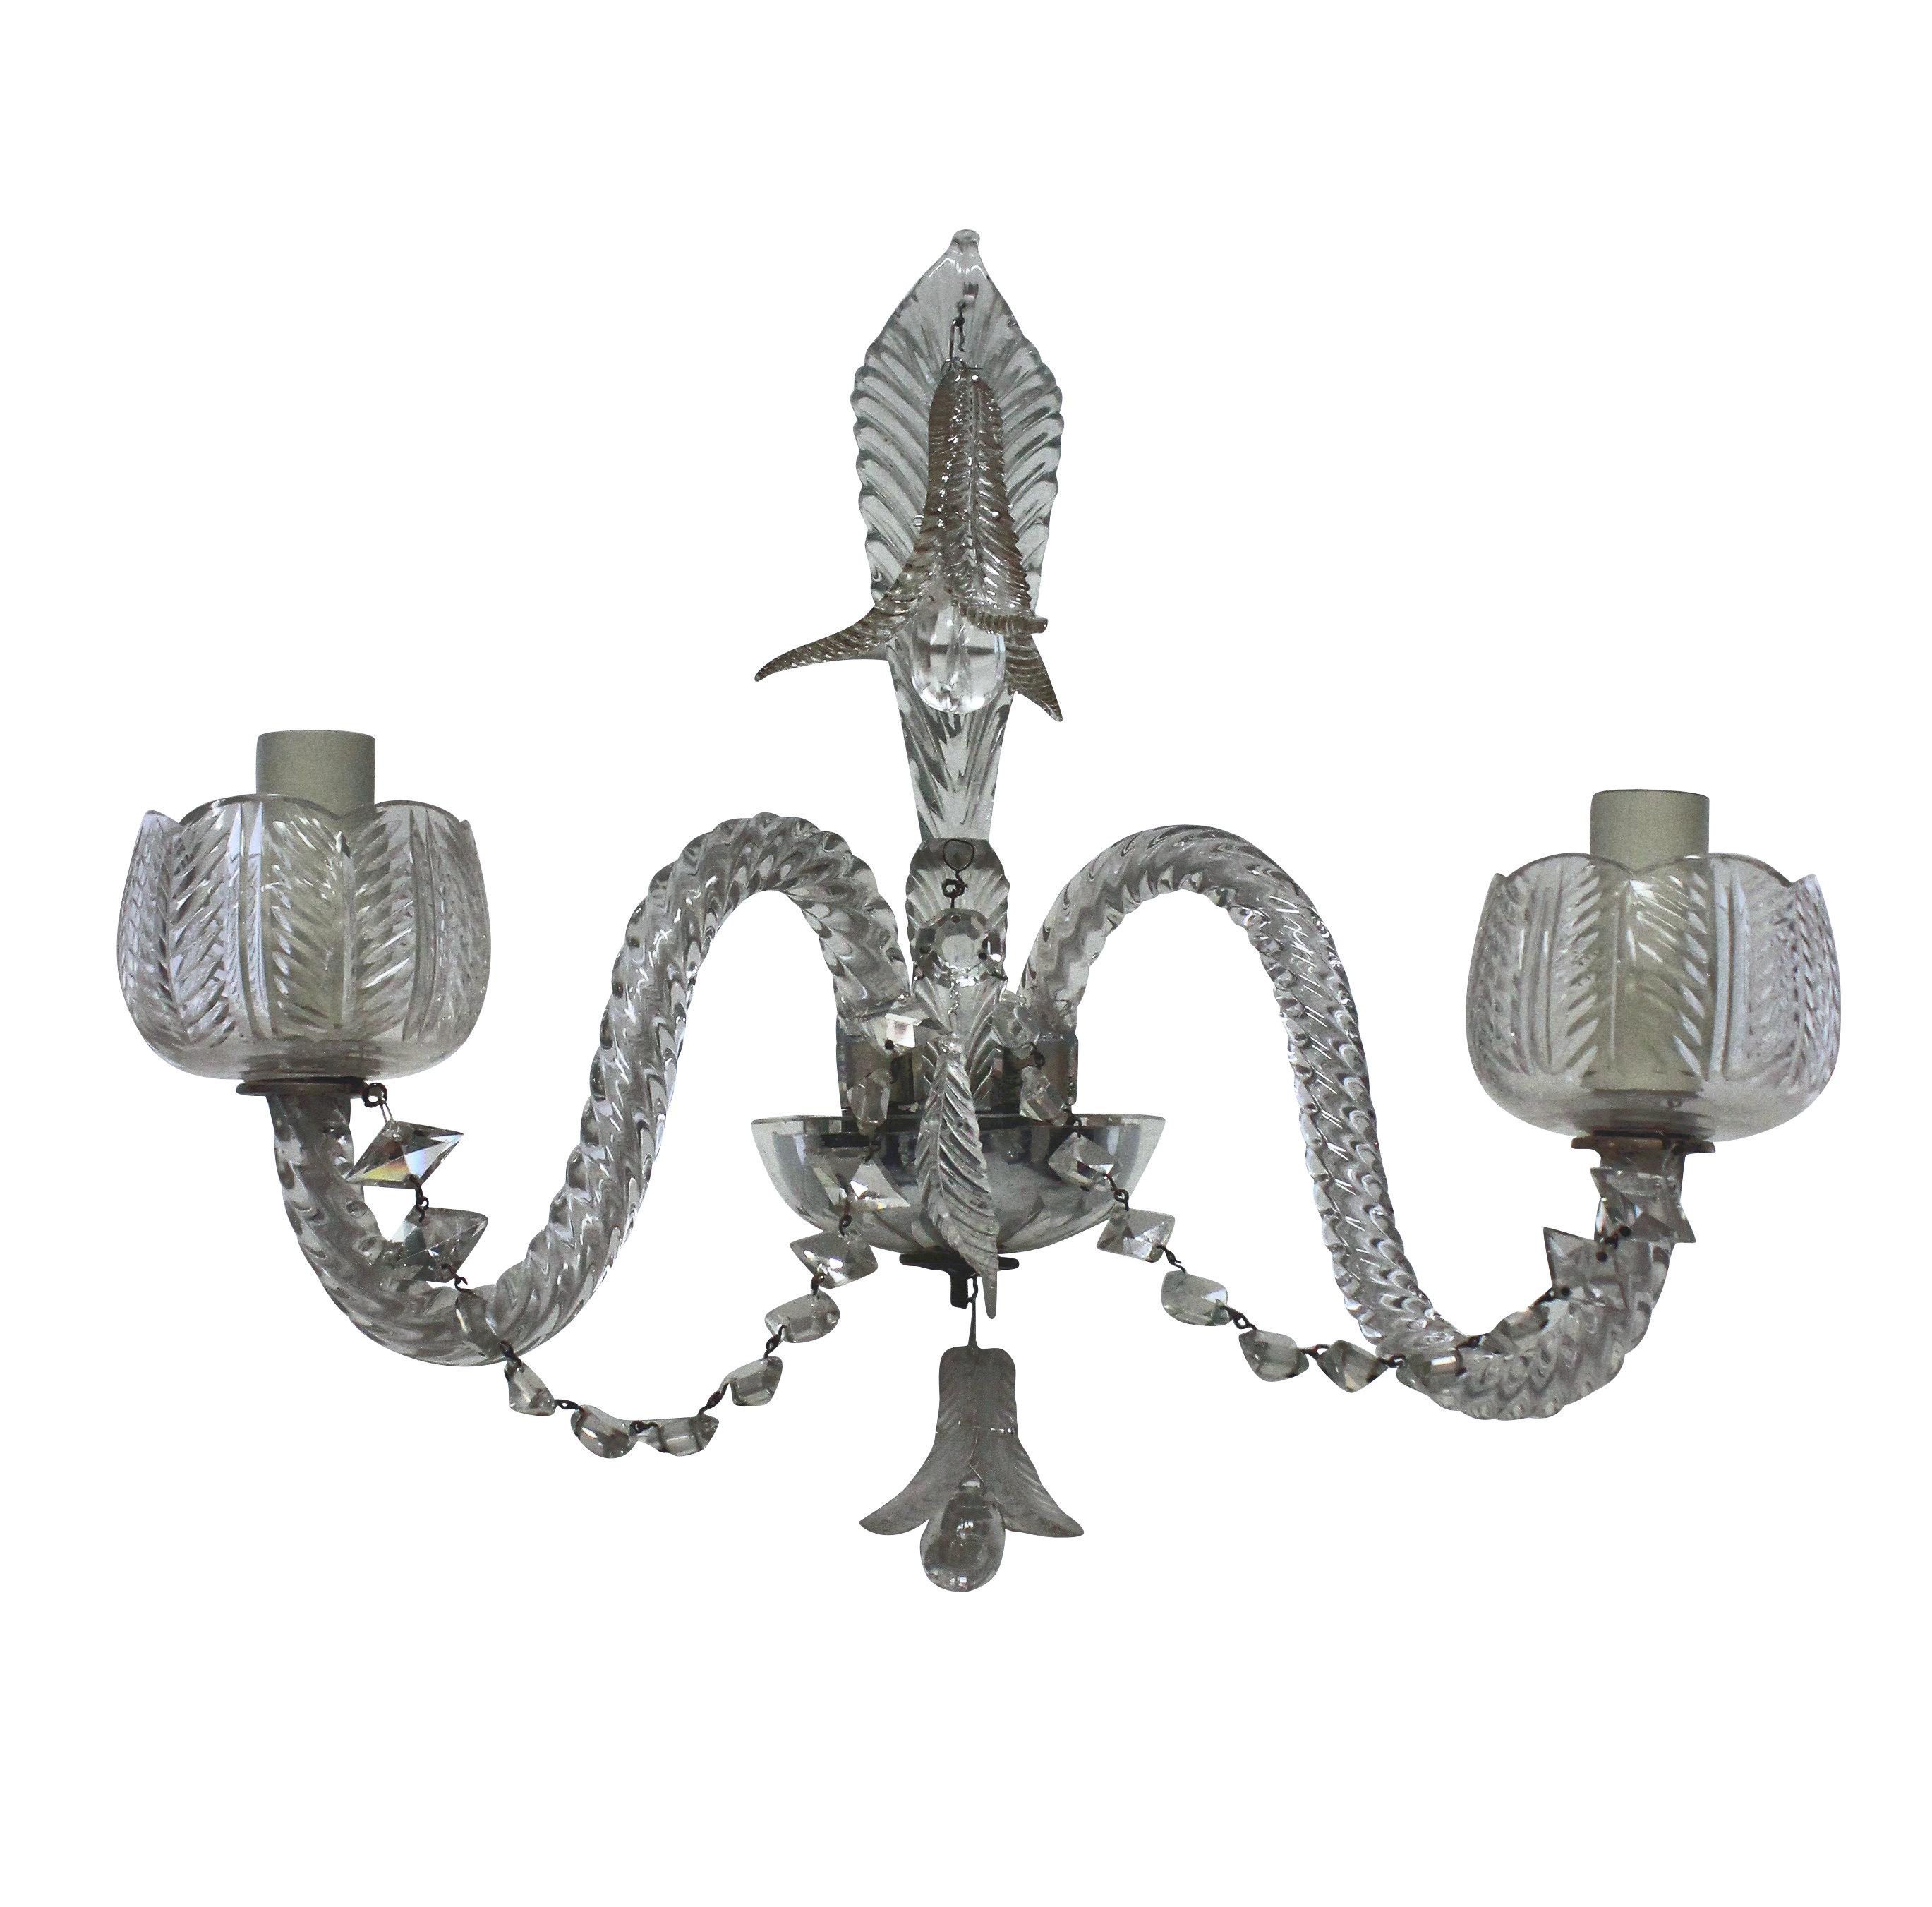 A pair of good quality French Baccarat cut glass, twin branch wall lights, with foliate patterns throughout. With a cut glass leaf at the centre of each, leaf pendants, diamond cut chains and leaf pattern sconce holders.